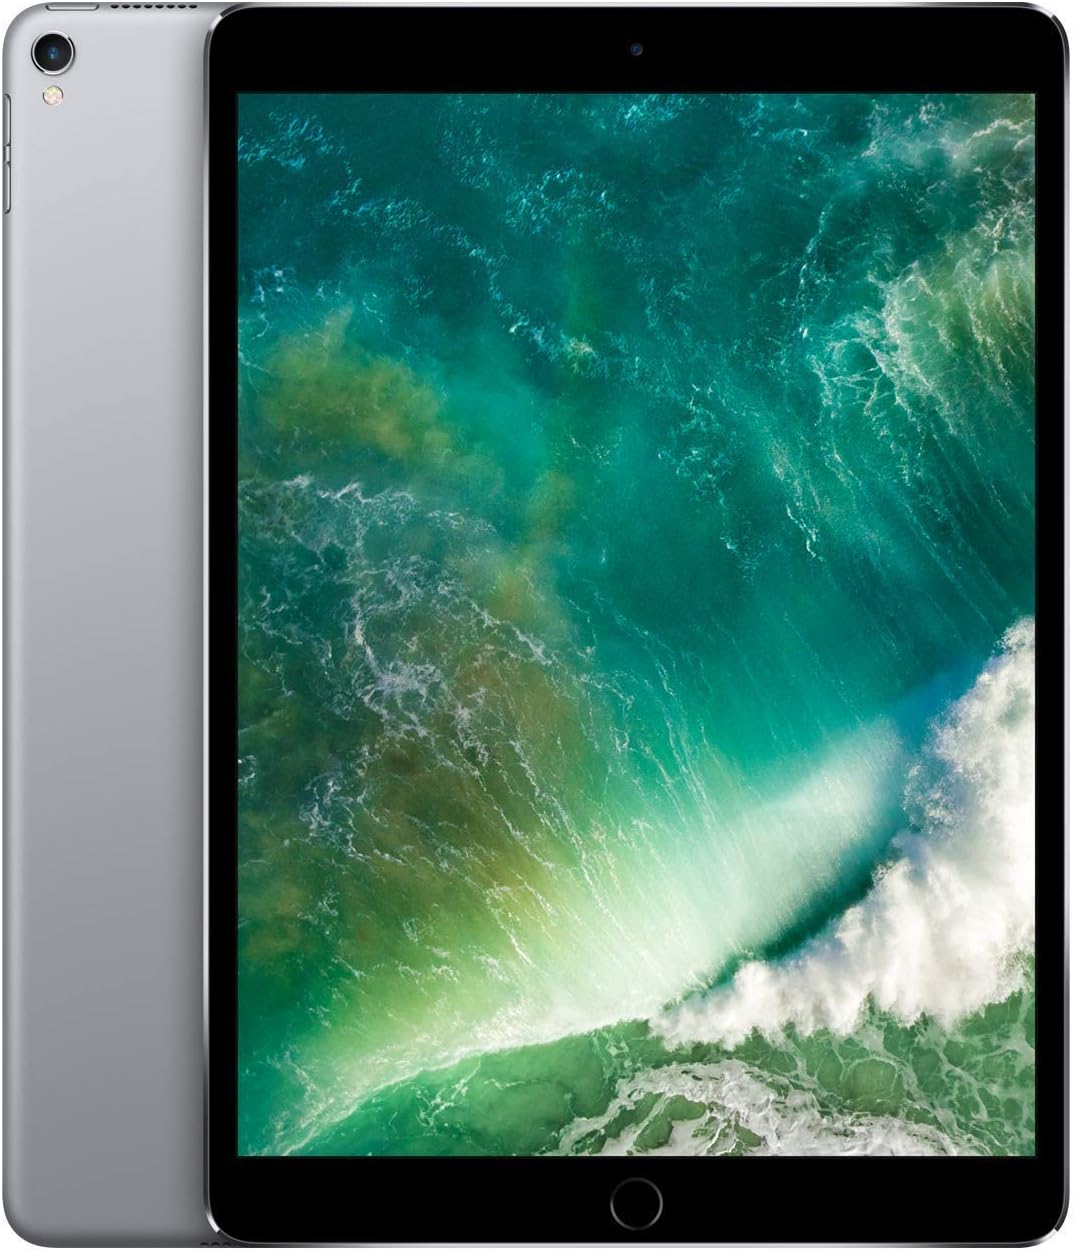 Apple iPad Pro, 10.5", 2017, WiFi Only 64GB Space Gray